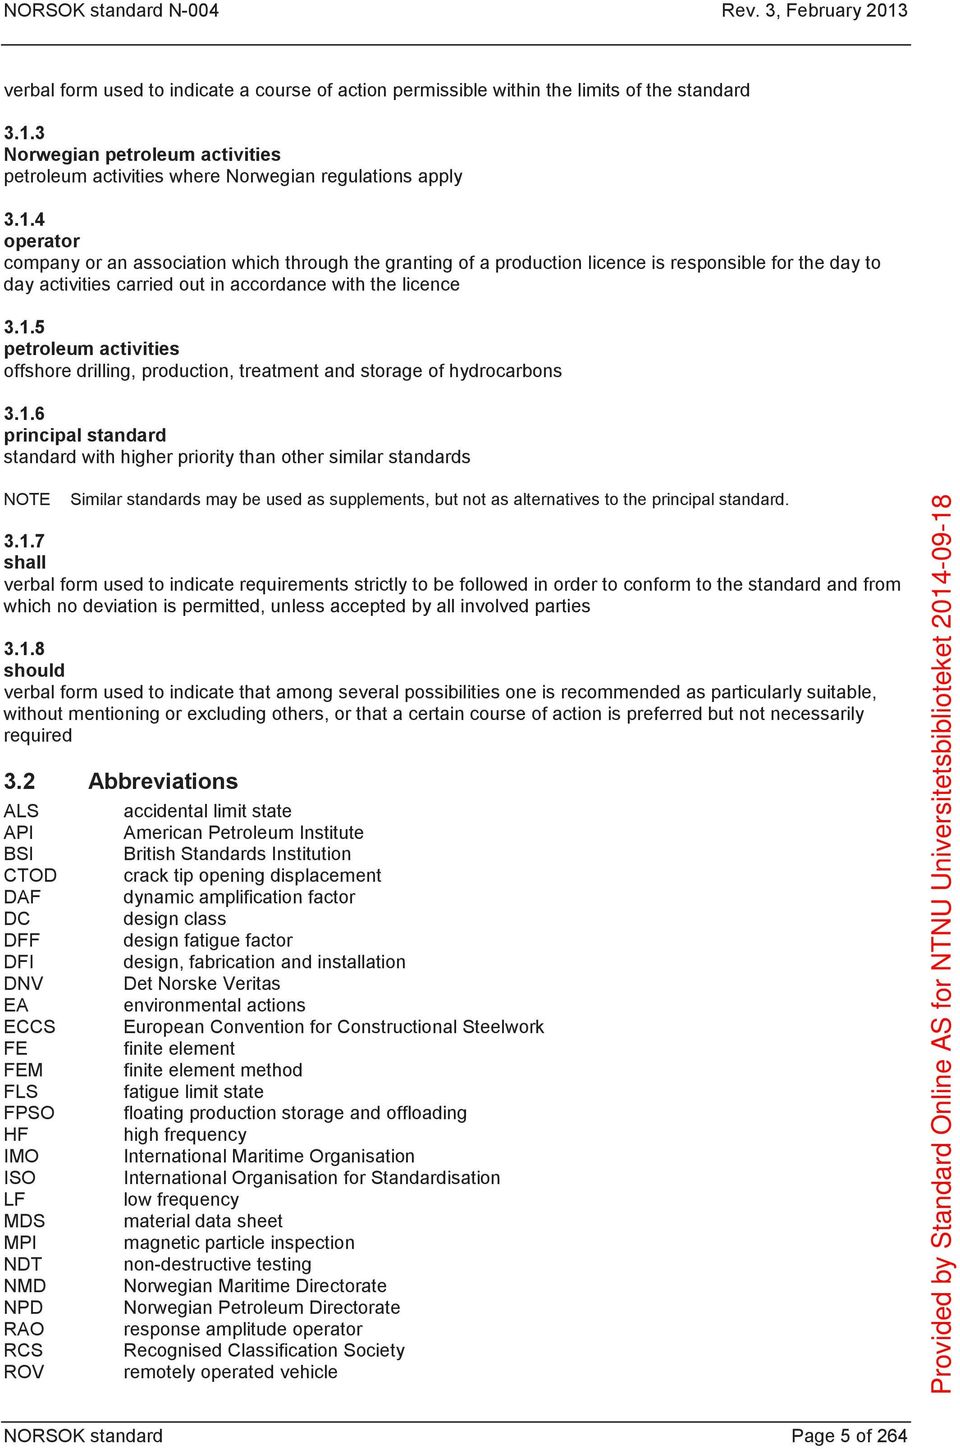 1.6 principal standard standard with higher priority than other similar standards NOTE Similar standards may be used as supplements, but not as alternatives to the principal standard. 3.1.7 shall verbal orm used to indicate requirements strictly to be ollowed in order to conorm to the standard and rom which no deviation is permitted, unless accepted by all involved parties 3.